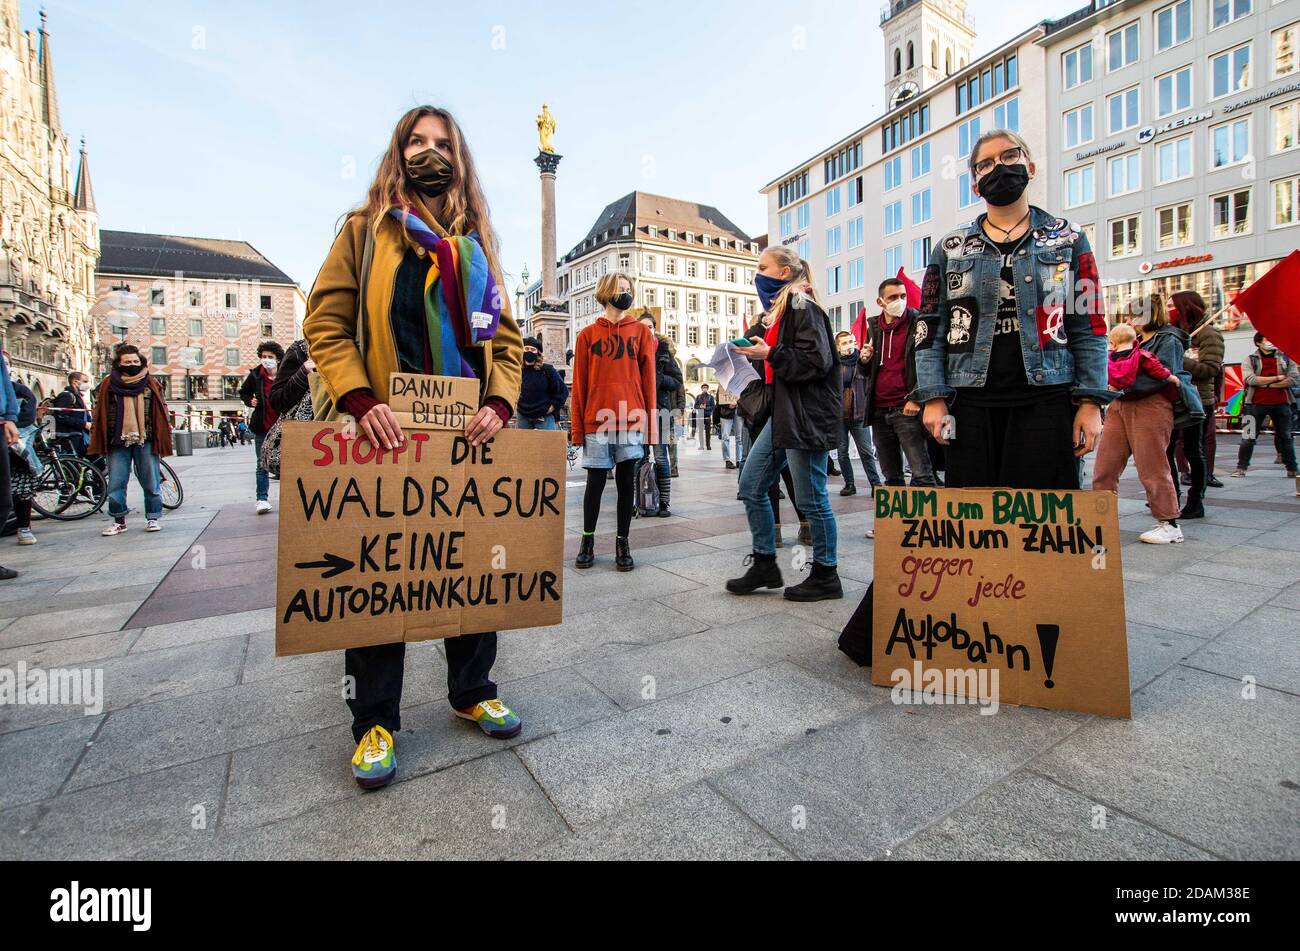 Munich, Bavaria, Germany. 13th Nov, 2020. Fridays for Future Germany has returned to the streets during the second wave of Coronavirus to protest against the clearing of the DannenrodÂ Forest (DannenrÃ¶derÂ Forst). The demonstrators marched from Marienplatz to the Green Party offices where three protestors climbed a tree a hung a banner which eventually resulted in a police response that was initially peacefully resolved until unidentified plainclothes officers attempted an apprehension without identifying themselves according to witnesses. The forest is currently being clearedÂ for the Aut Stock Photo